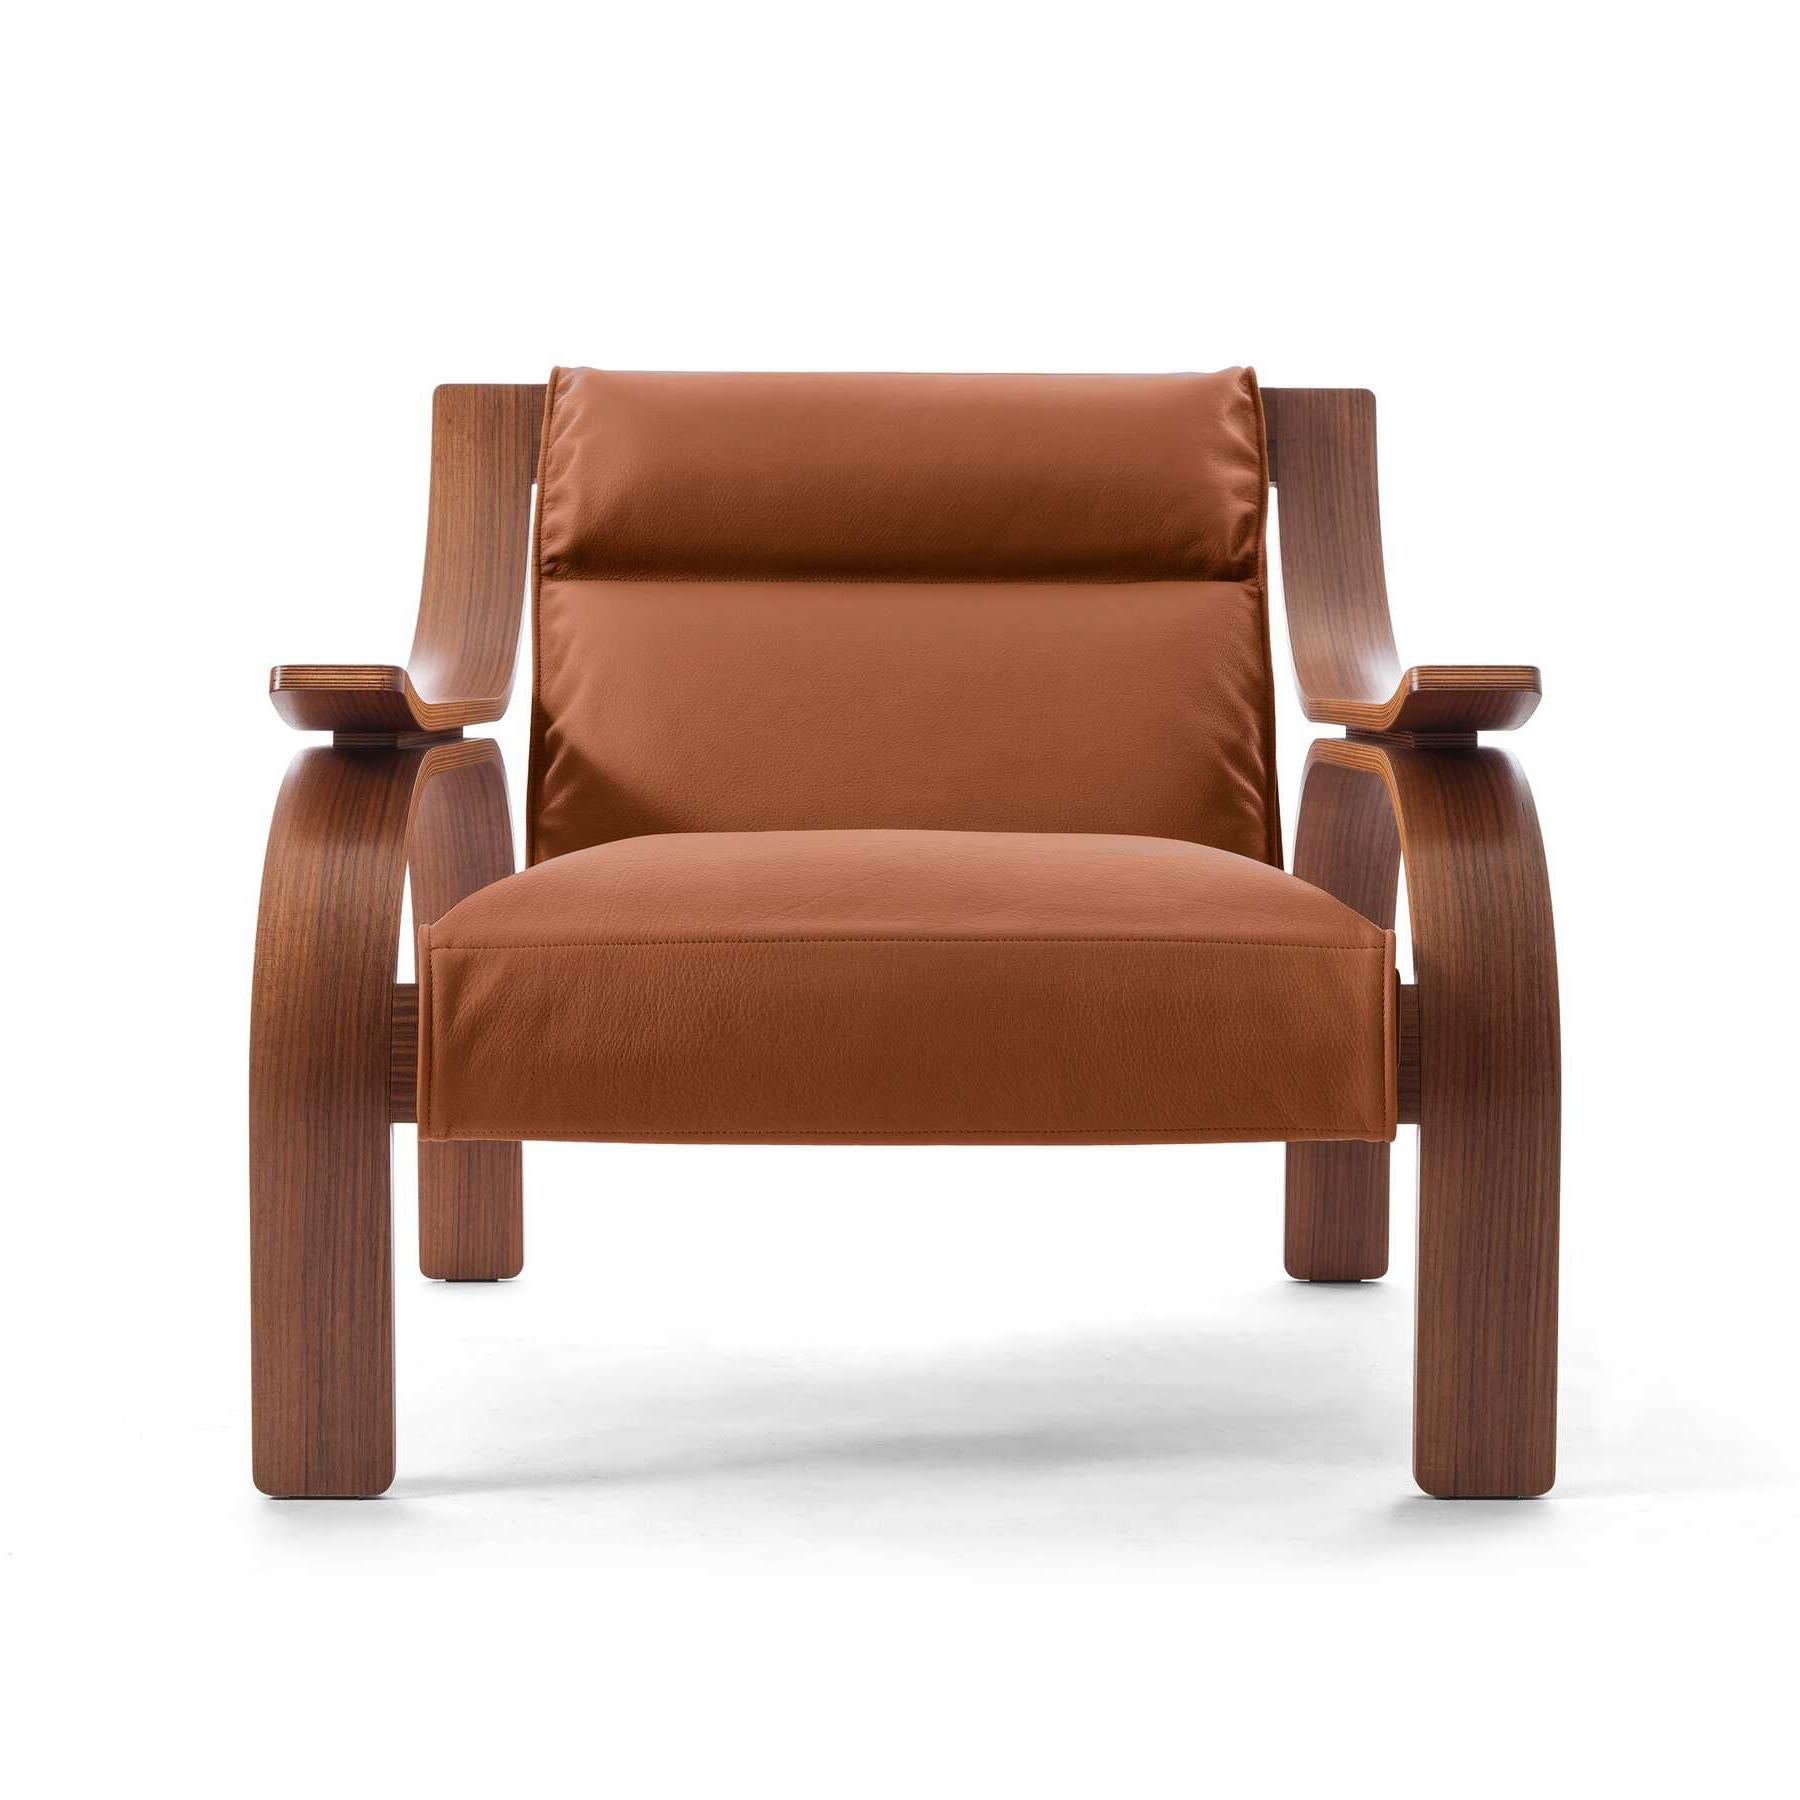 Woodline armchair designed by Marco Zanuso in 1964, relaunched in 2015.

Leather and stained walnut wood.

Manufactured by Cassina in Italy.

An armchair with a striking, rigorous design, the outcome of research by Marco Zanuso on how to